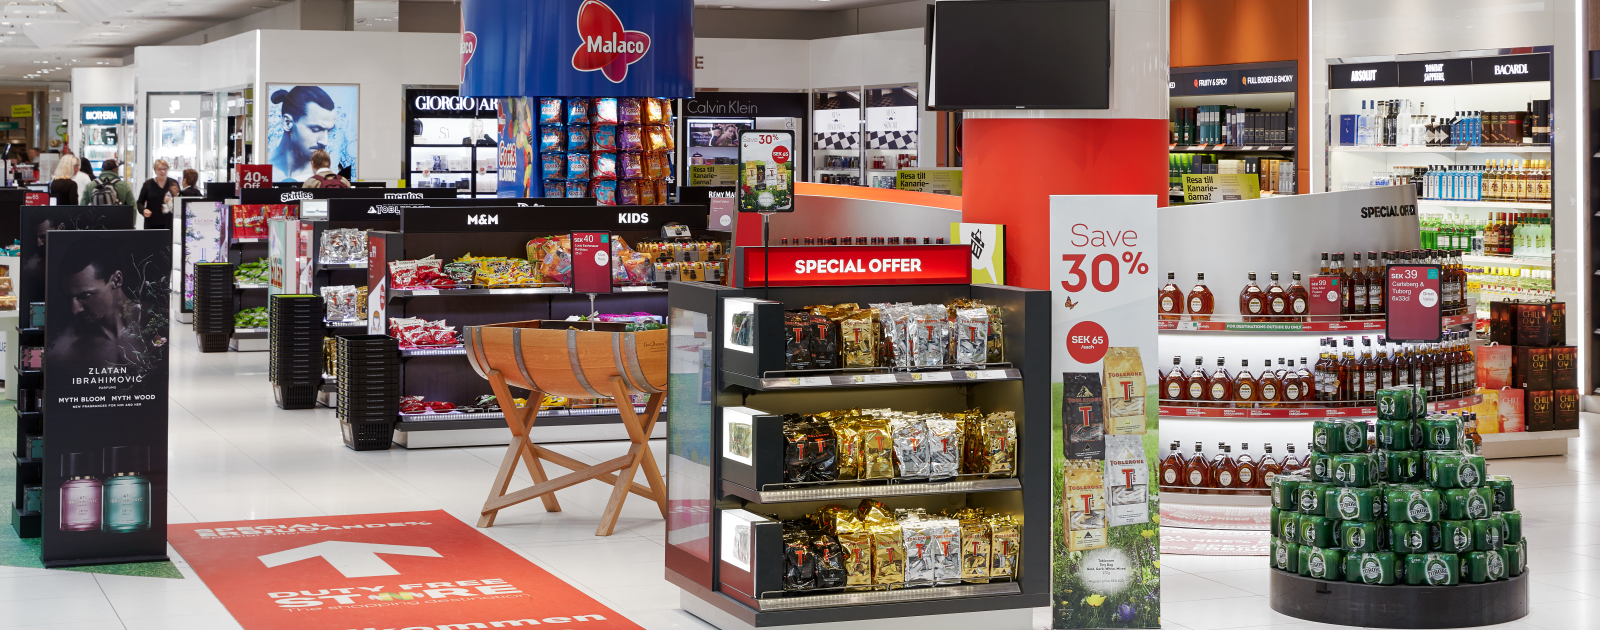 Duty Free Store with special offers